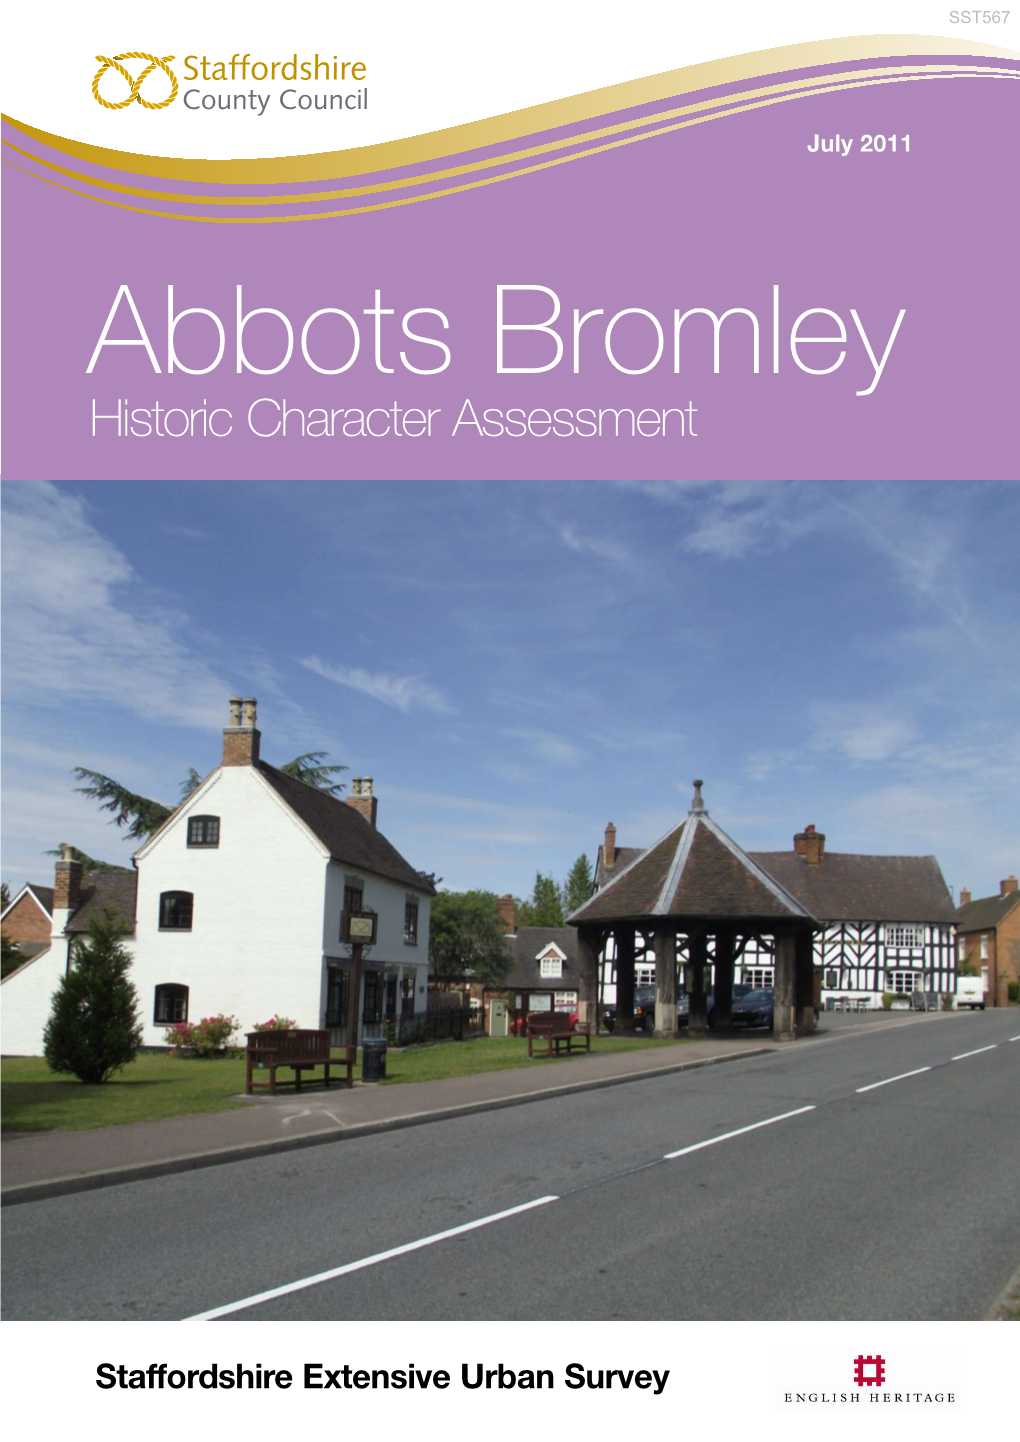 Abbots Bromley EUS Report.Cdr